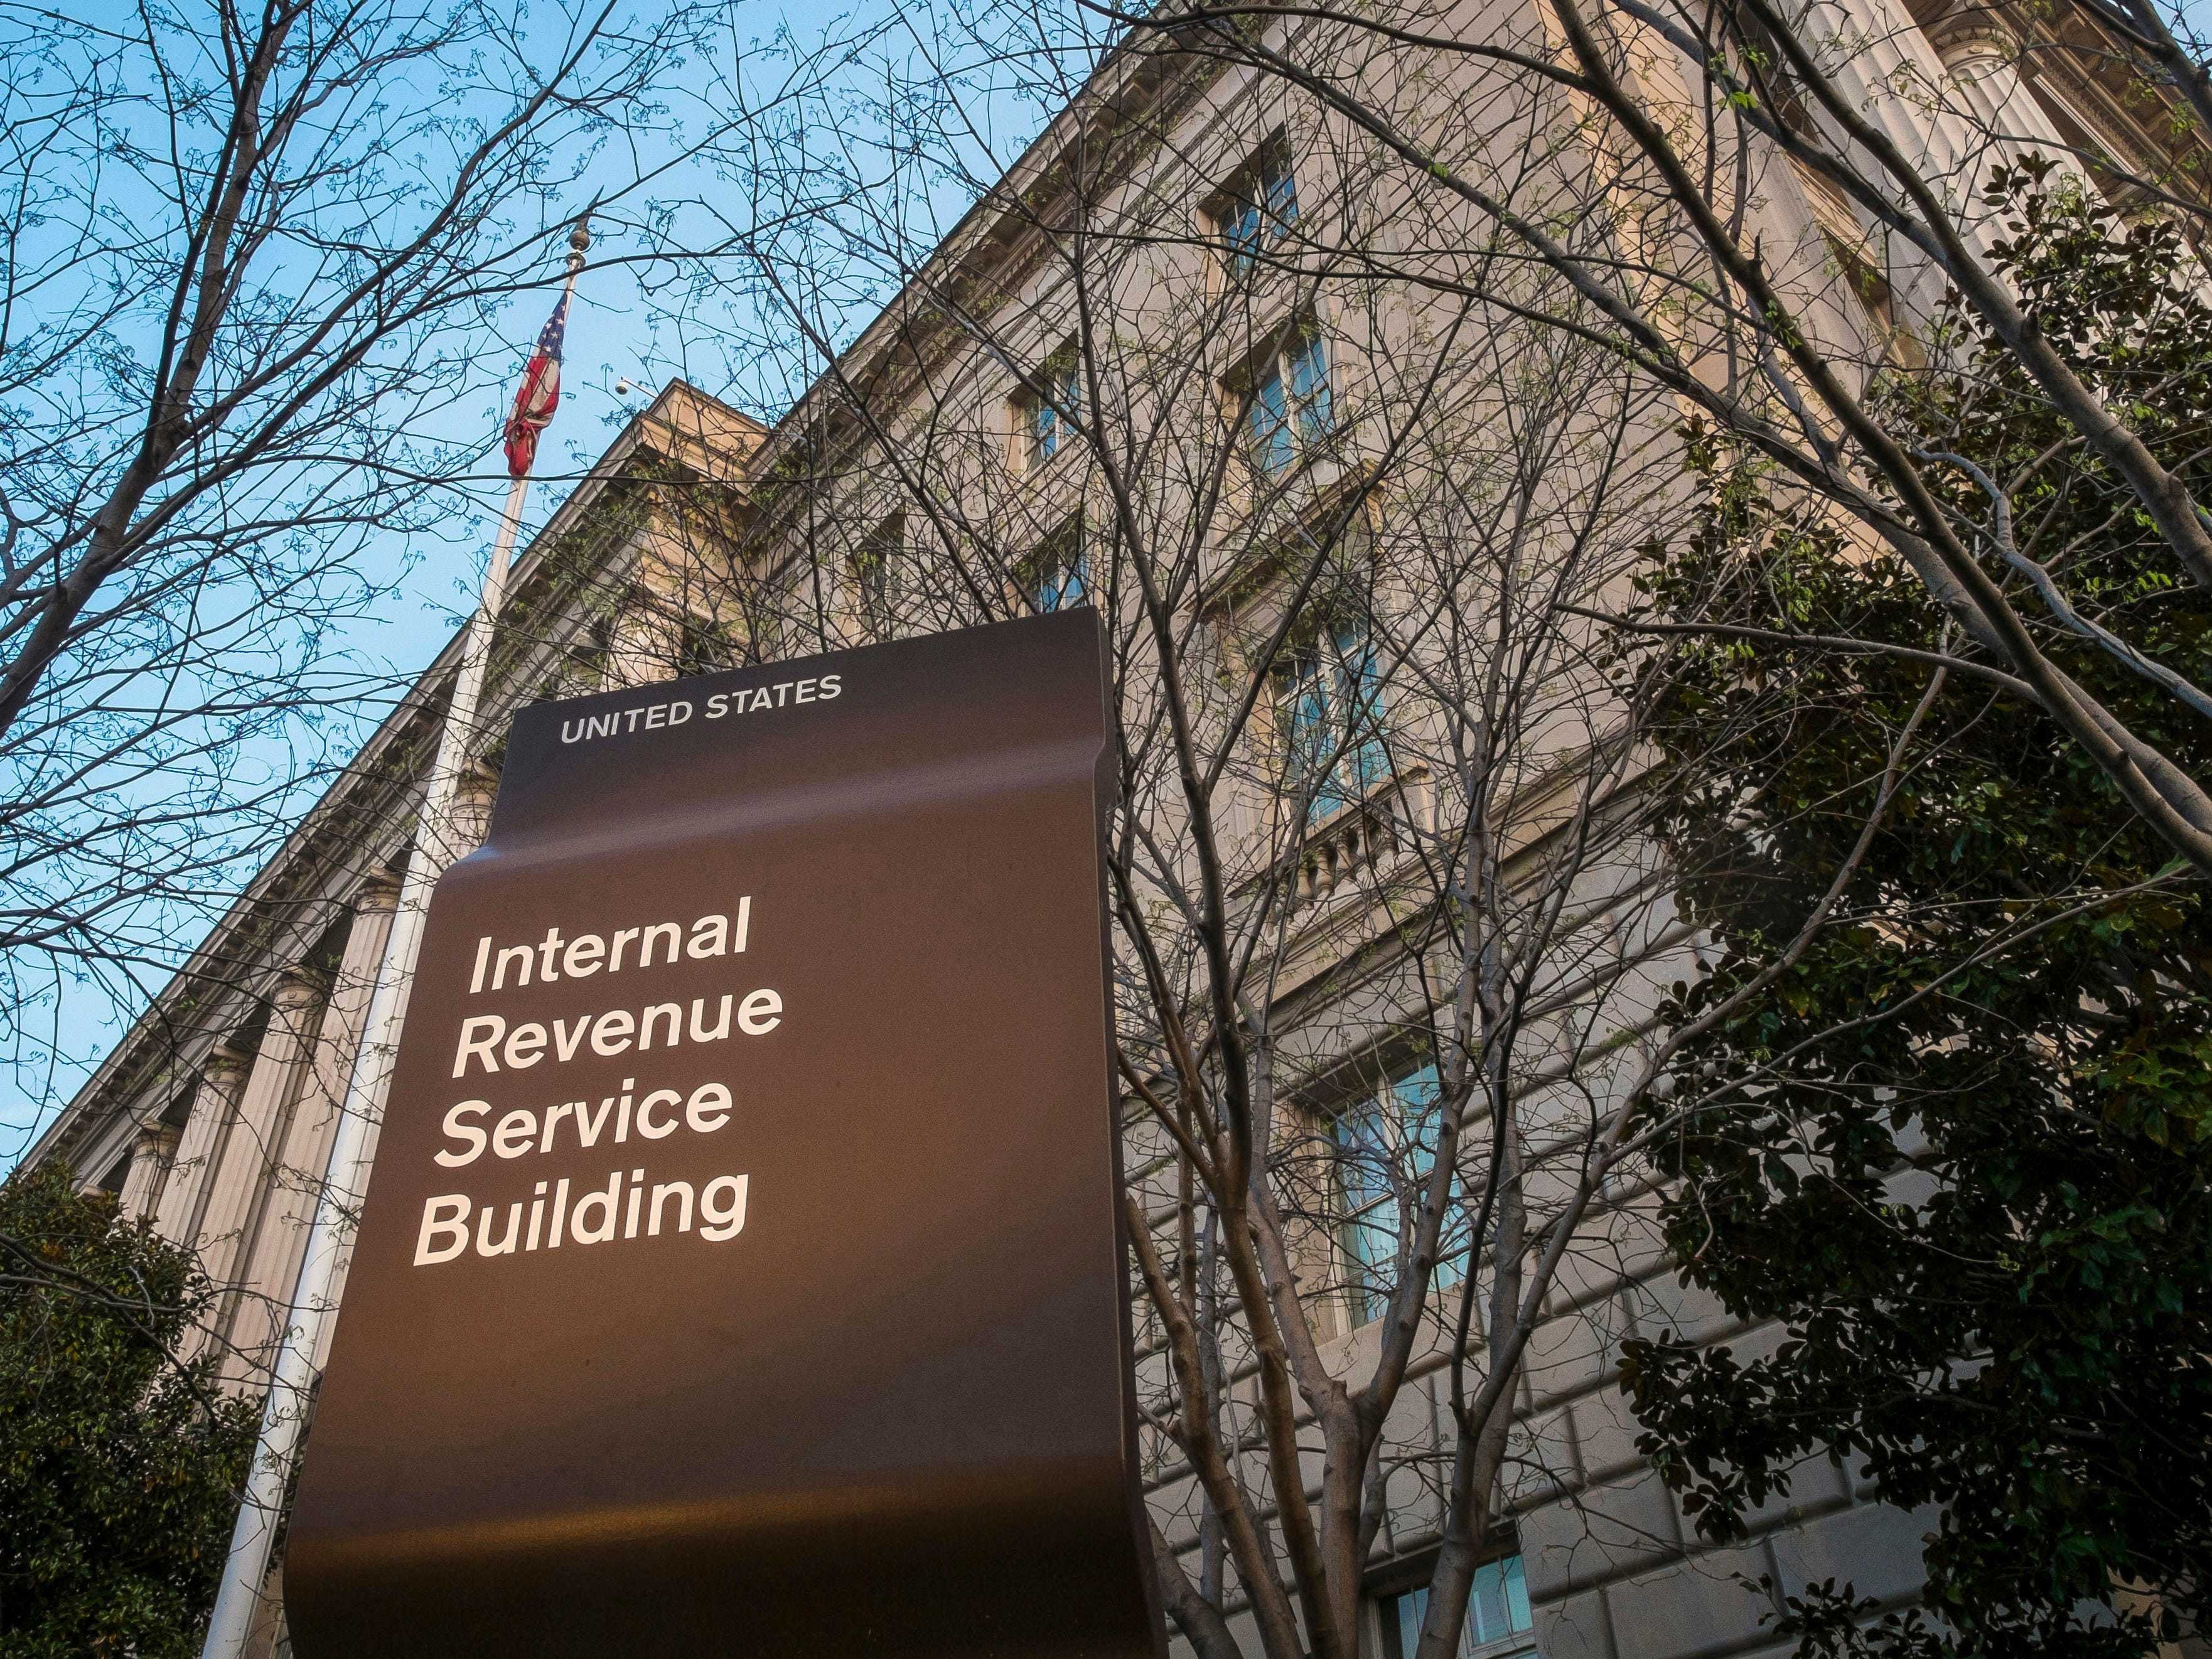 FILE - This April 13, 2014, file photo shows the Internal Revenue Service (IRS) headquarters building in Washington. 2019 was another tough year for the IRS, according to a new federal report. Burdened with years of budget cuts and a recent increase in workload to implement a new tax law, the IRS struggled to deliver on its mission in the past fiscal year. The annual report from the Office of Taxpayer Advocate found that in the 2019 fiscal year, among other problems, the agency failed to collect billions in unpaid taxes. (AP Photo/J. David Ake, File)